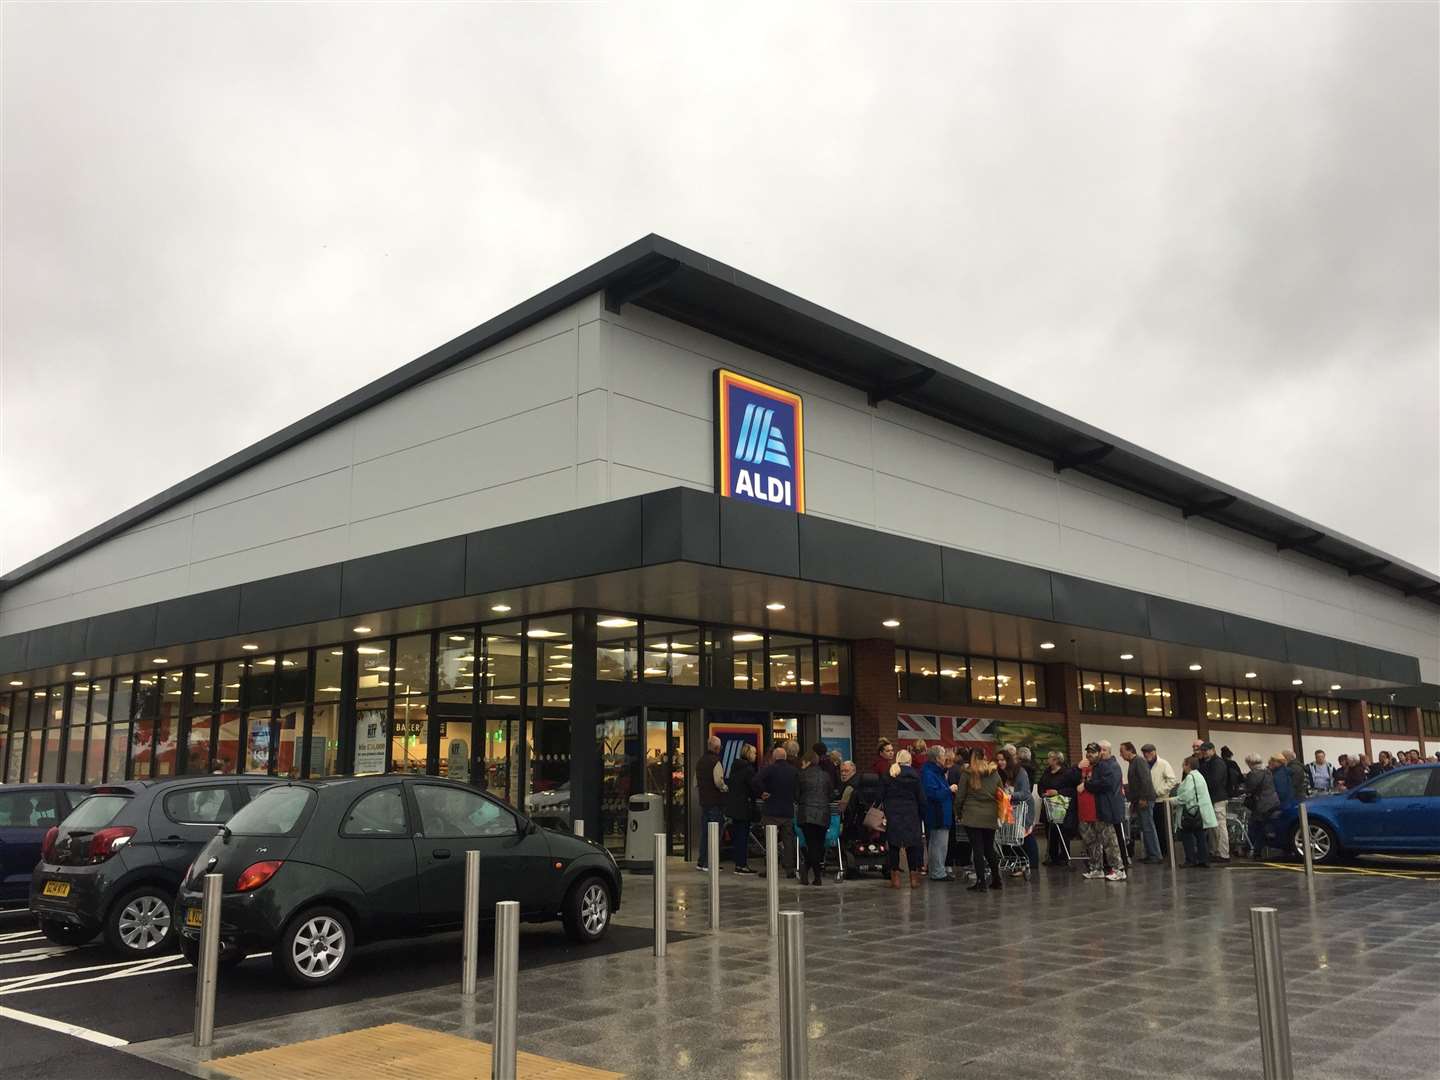 Aldi in Hythe opened at 8am